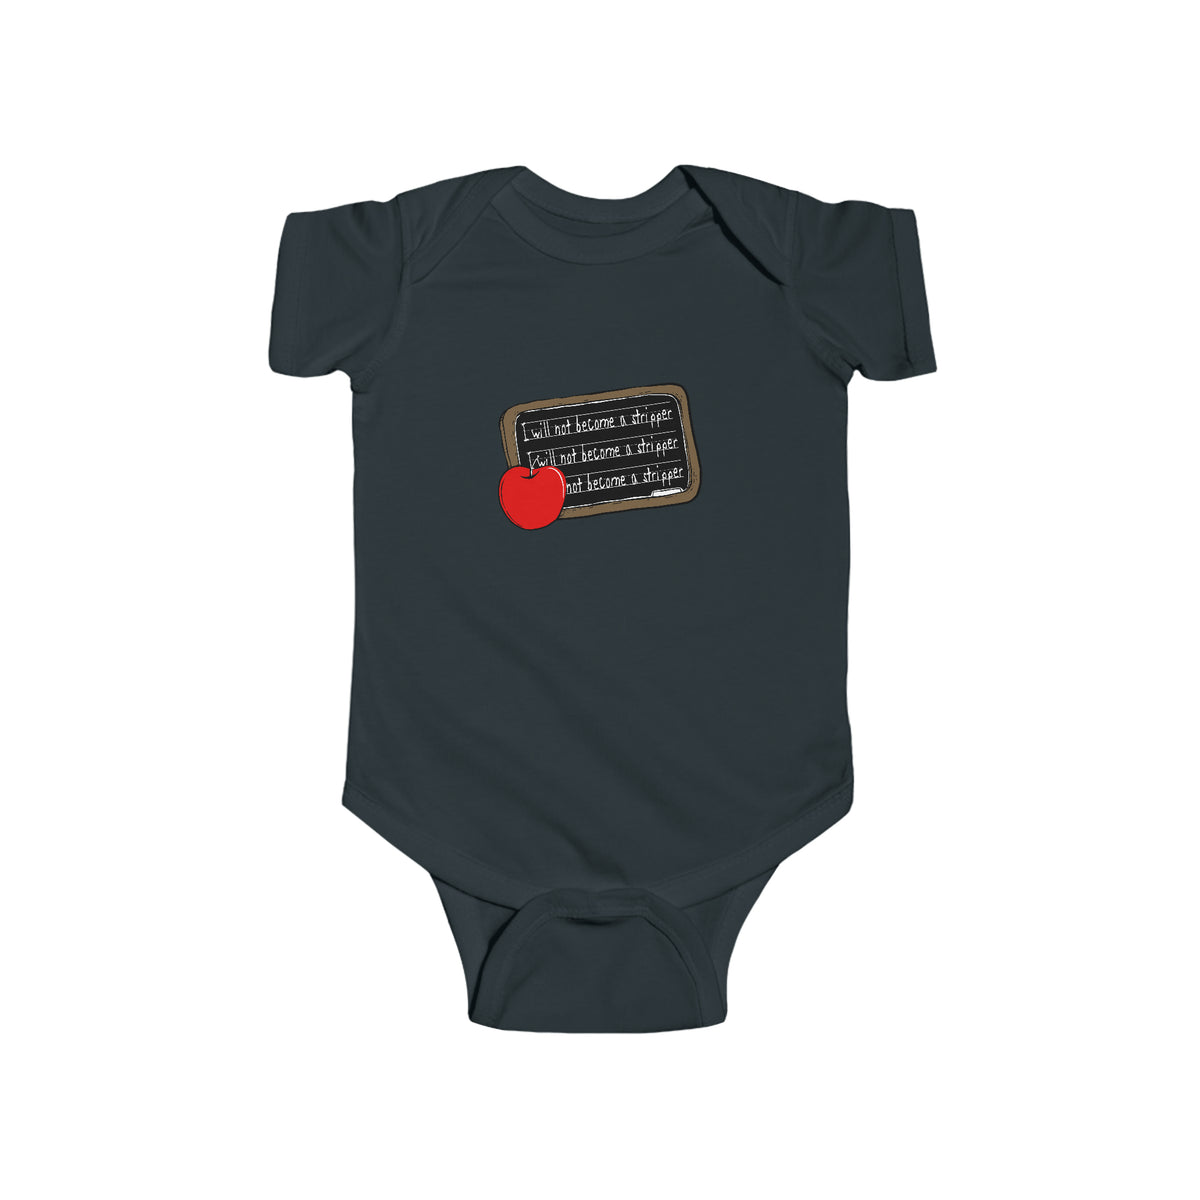 I Will Not Become A Stripper - Baby Onesie